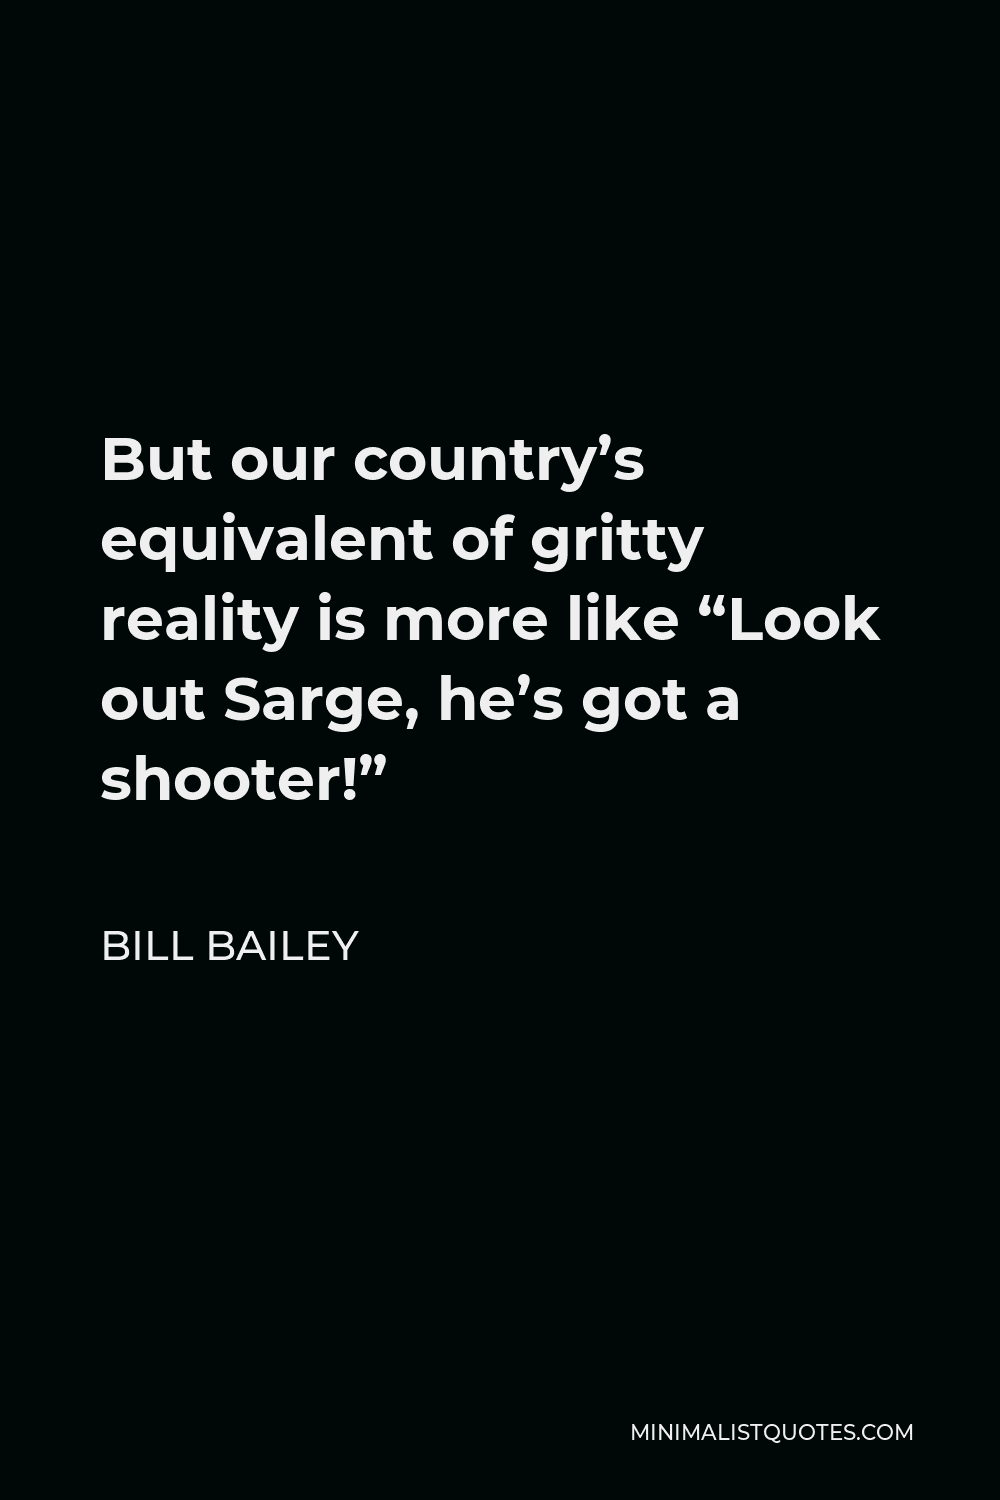 Bill Bailey Quote - But our country’s equivalent of gritty reality is more like “Look out Sarge, he’s got a shooter!”